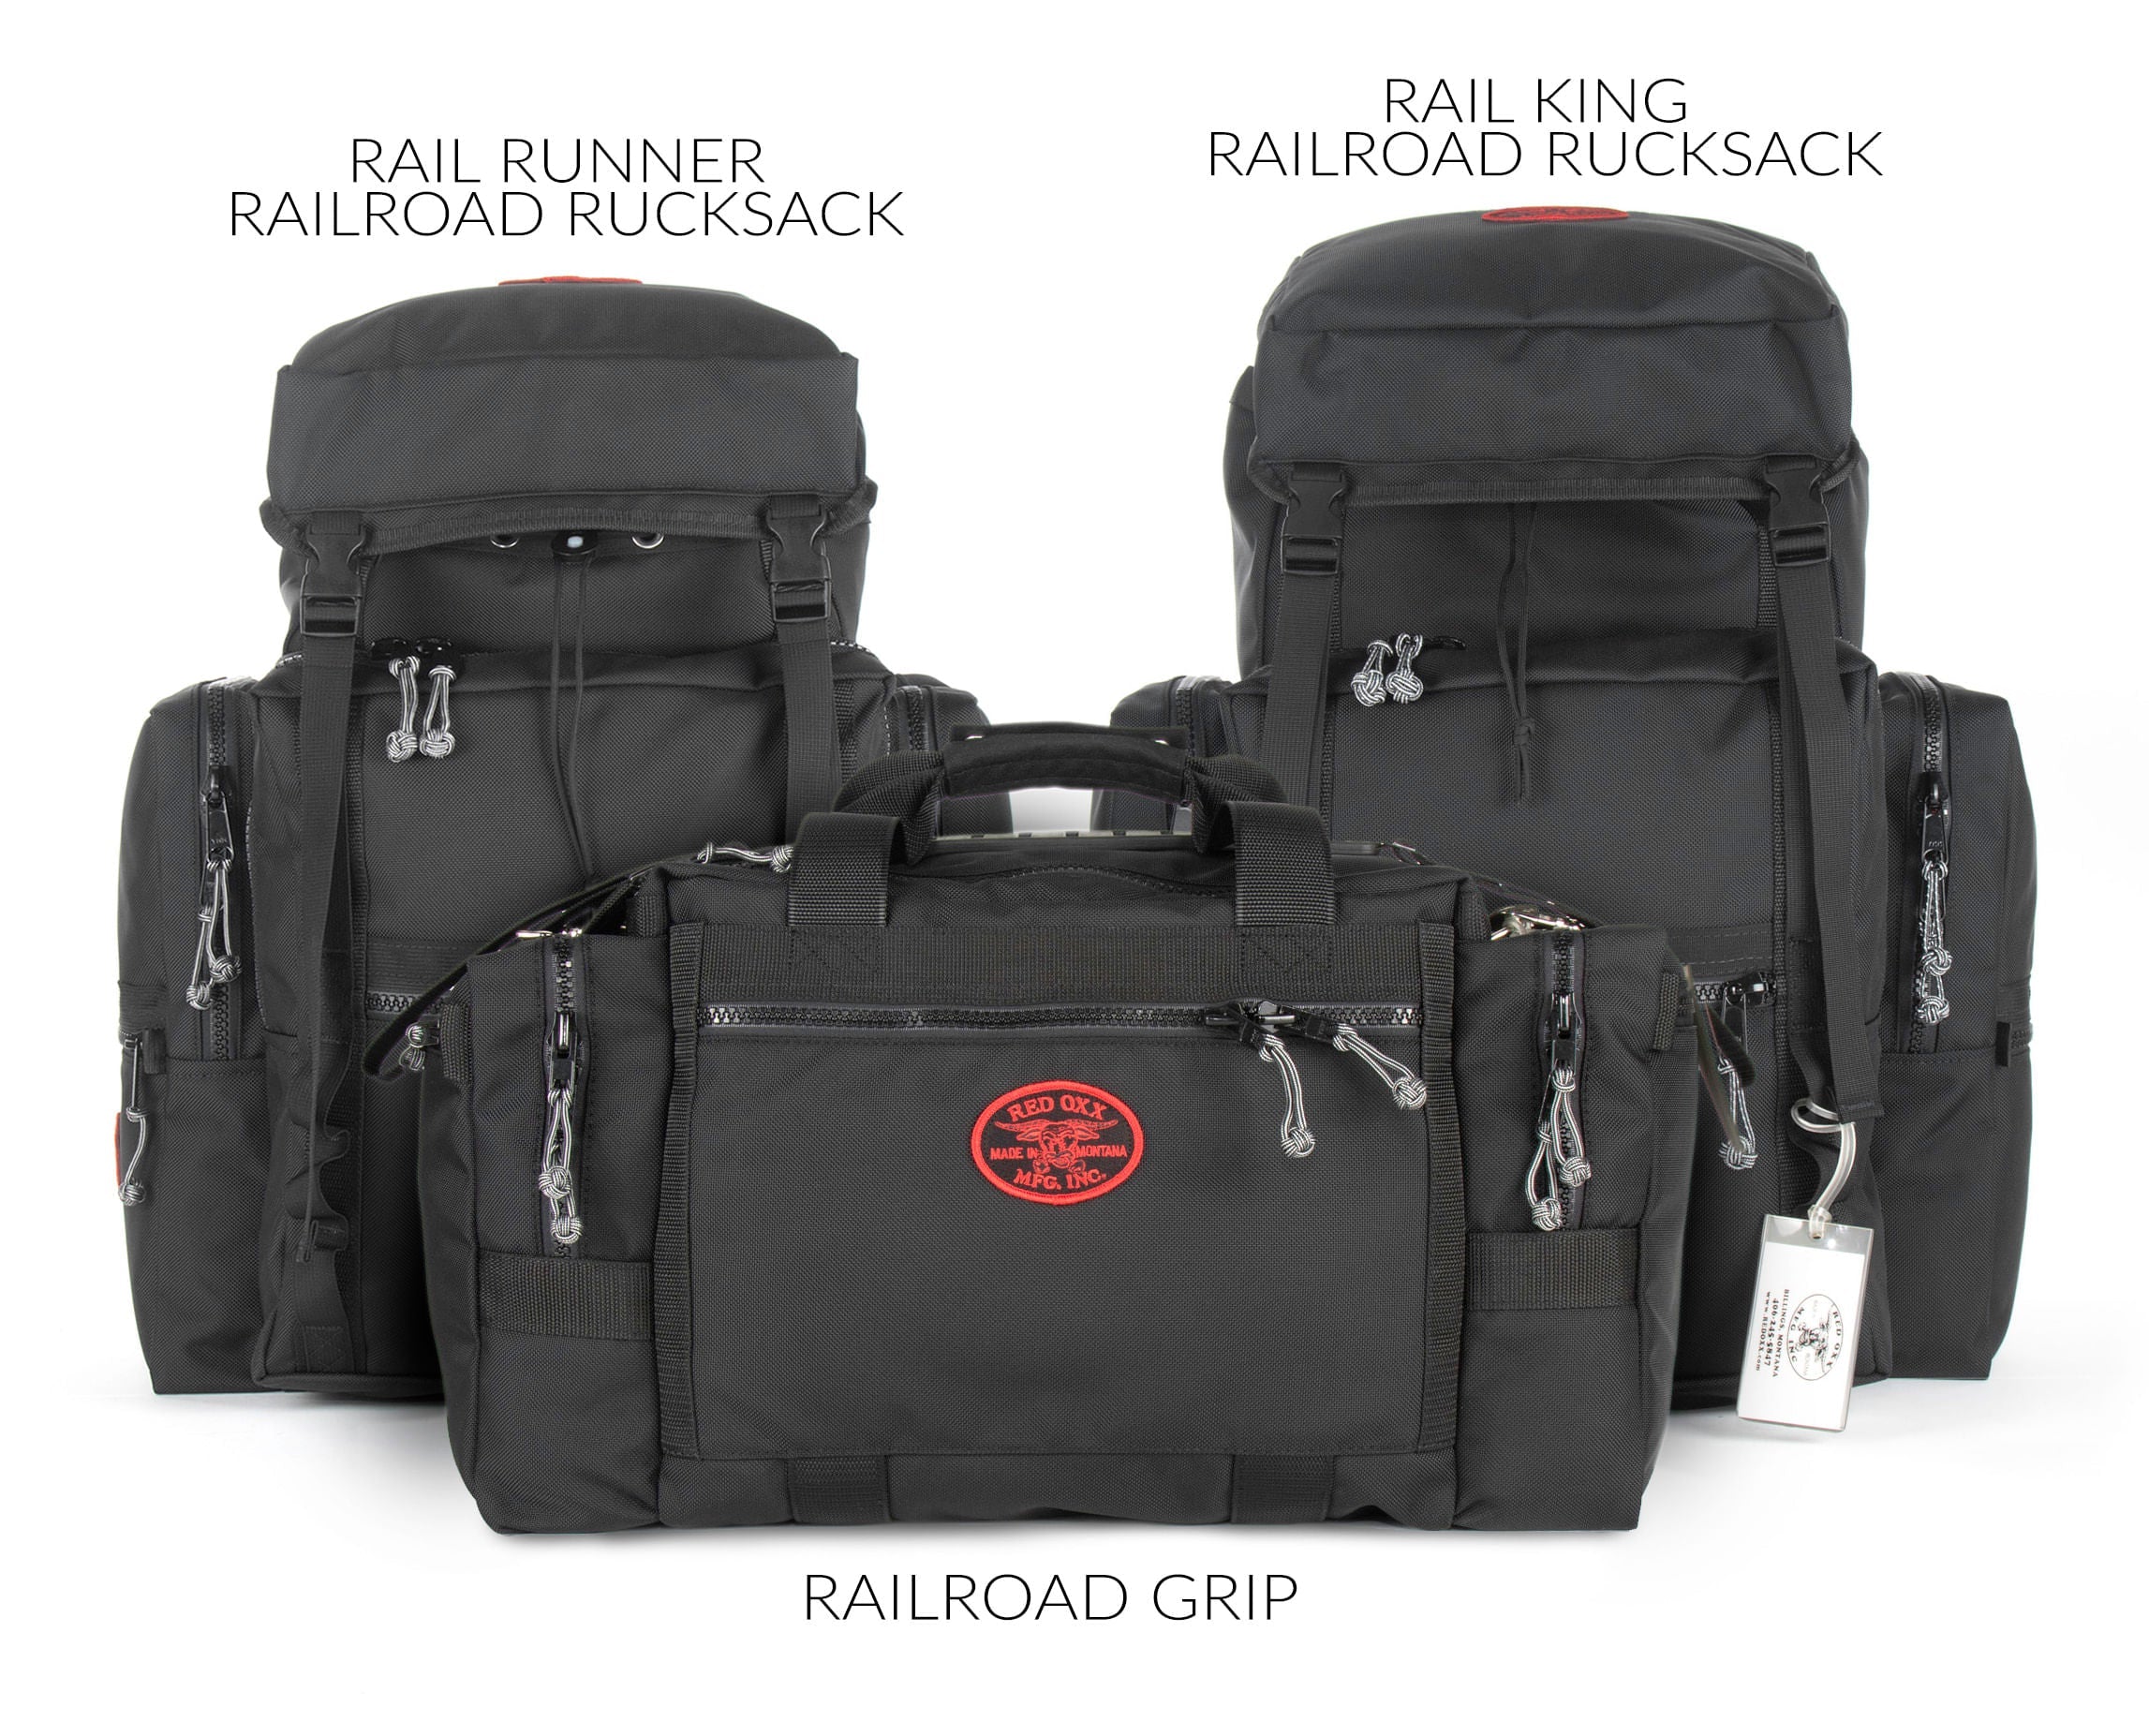 Size comparison of Railrunner Ruck (left) and Rail King (right) Railroad Grip front and center.